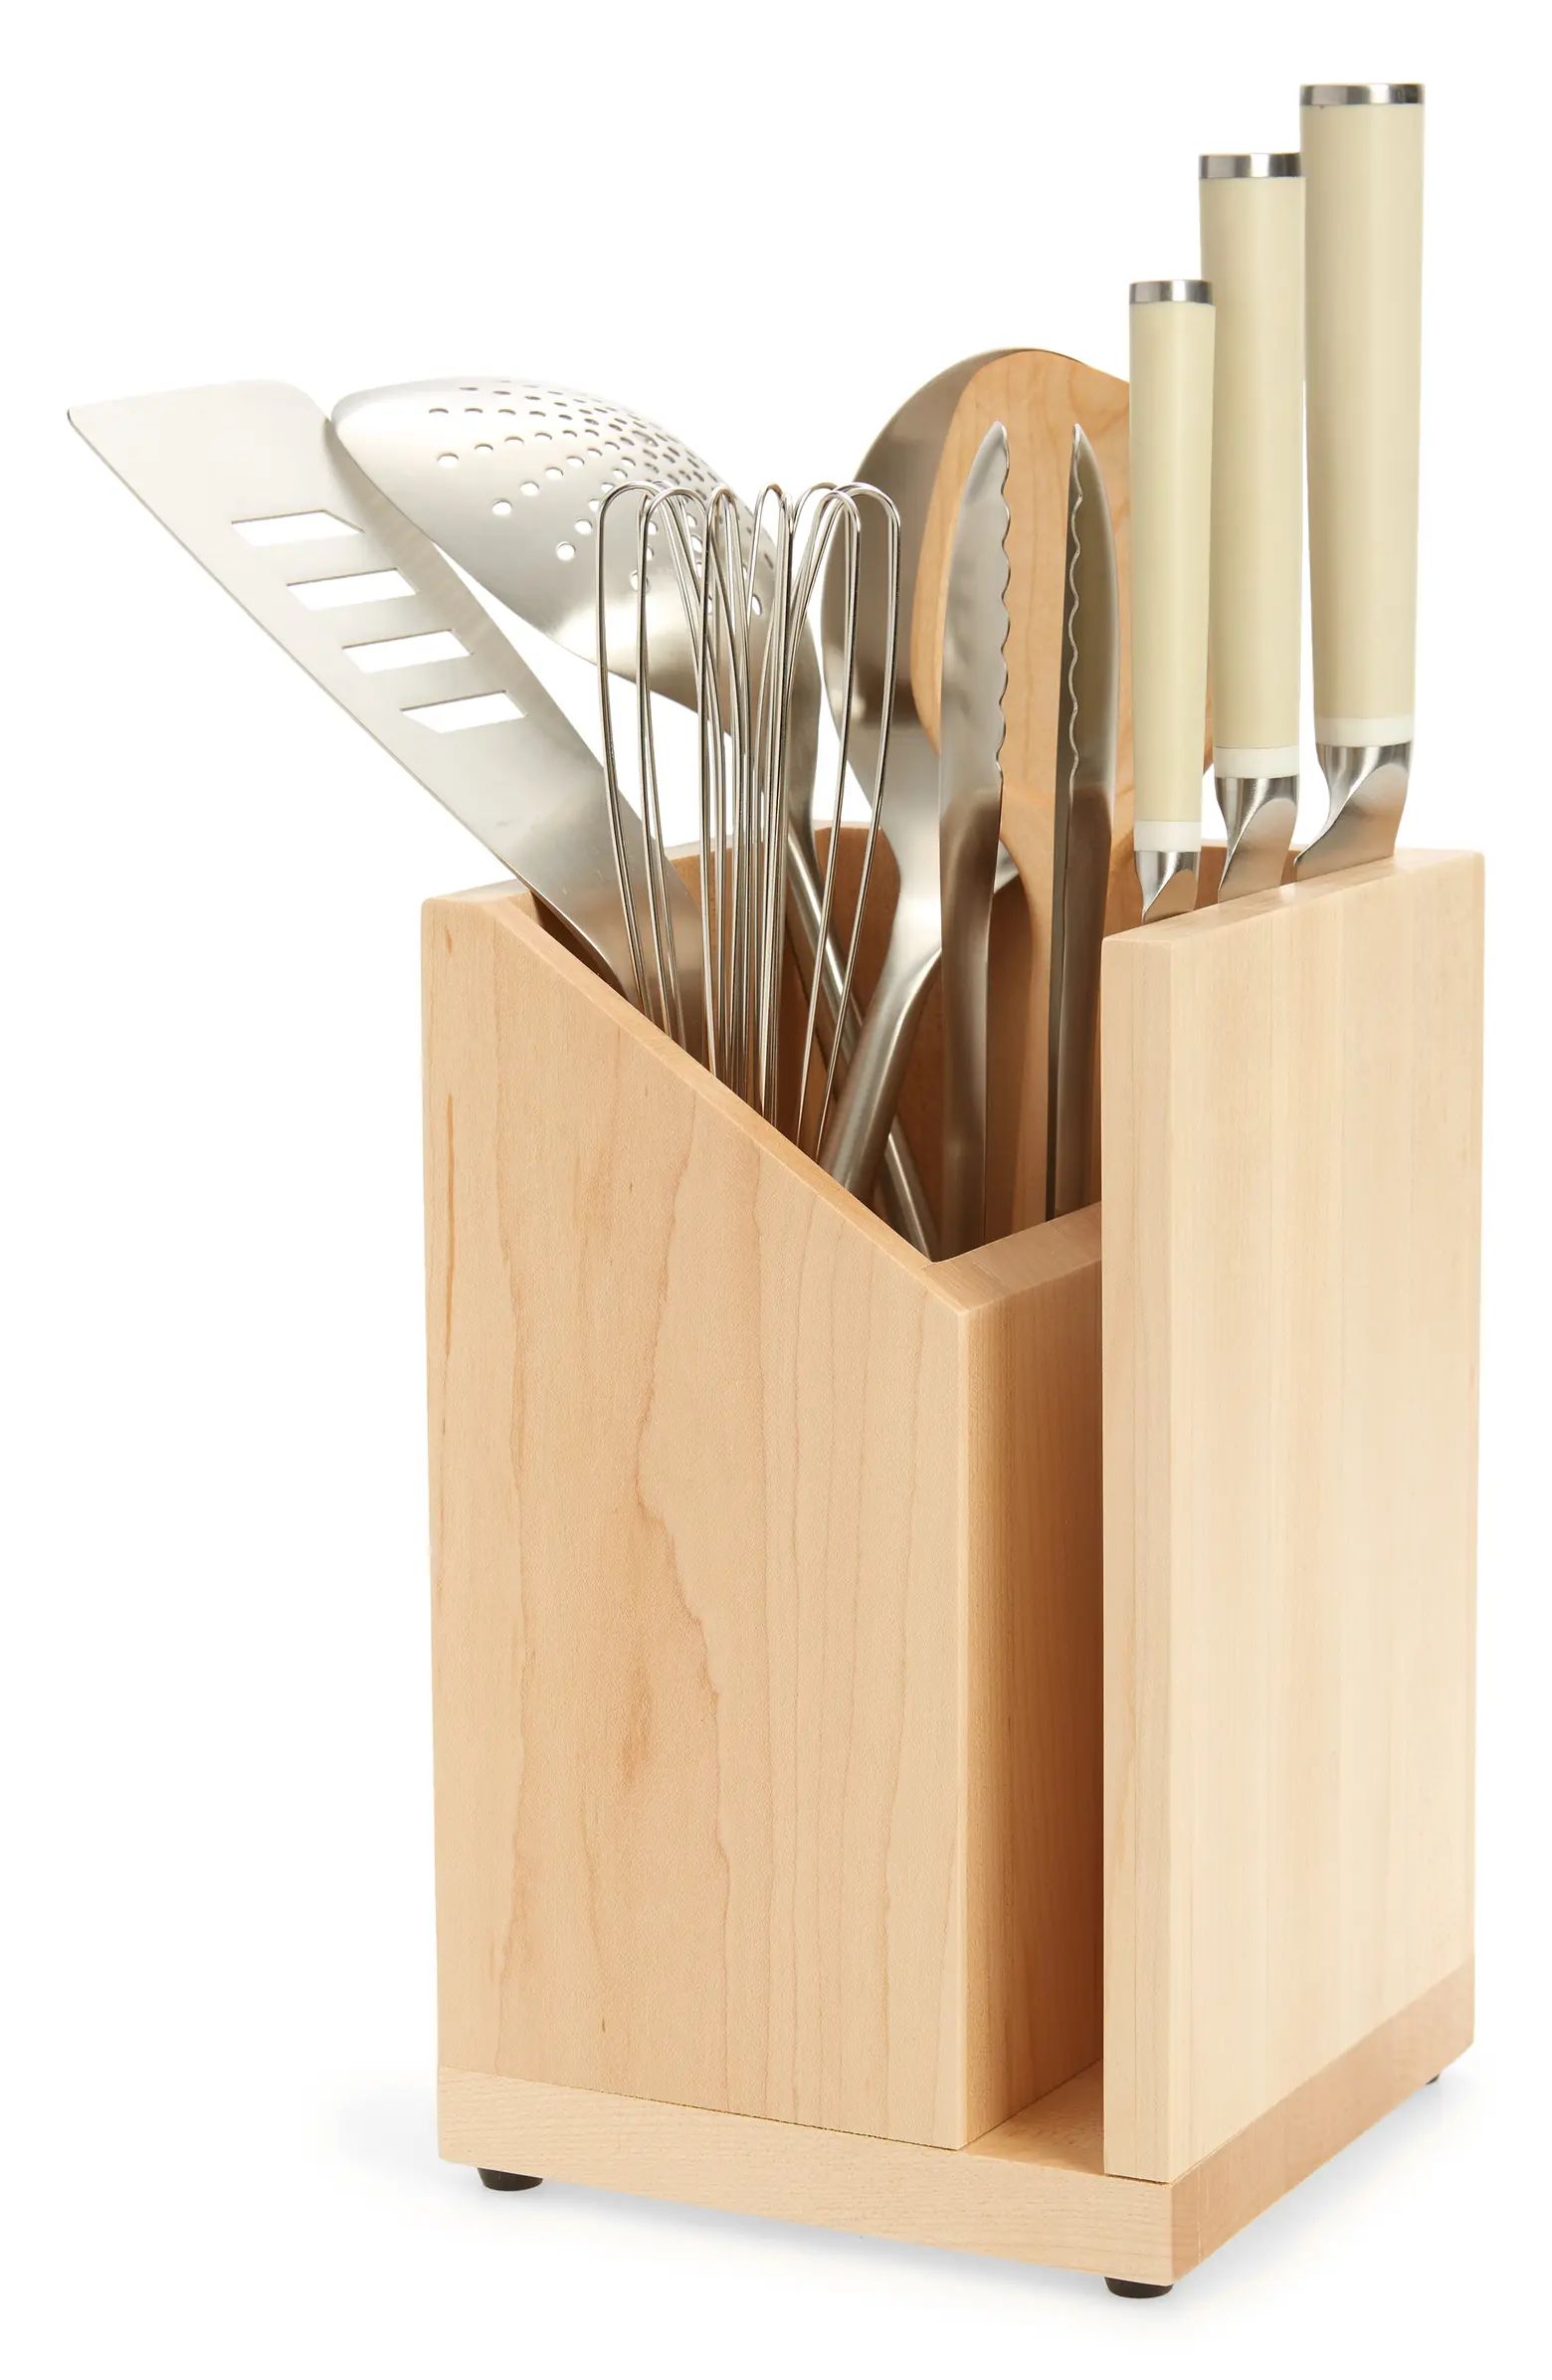 MATERIAL The Iconics Essential Kitchen Tools | Nordstrom | Nordstrom